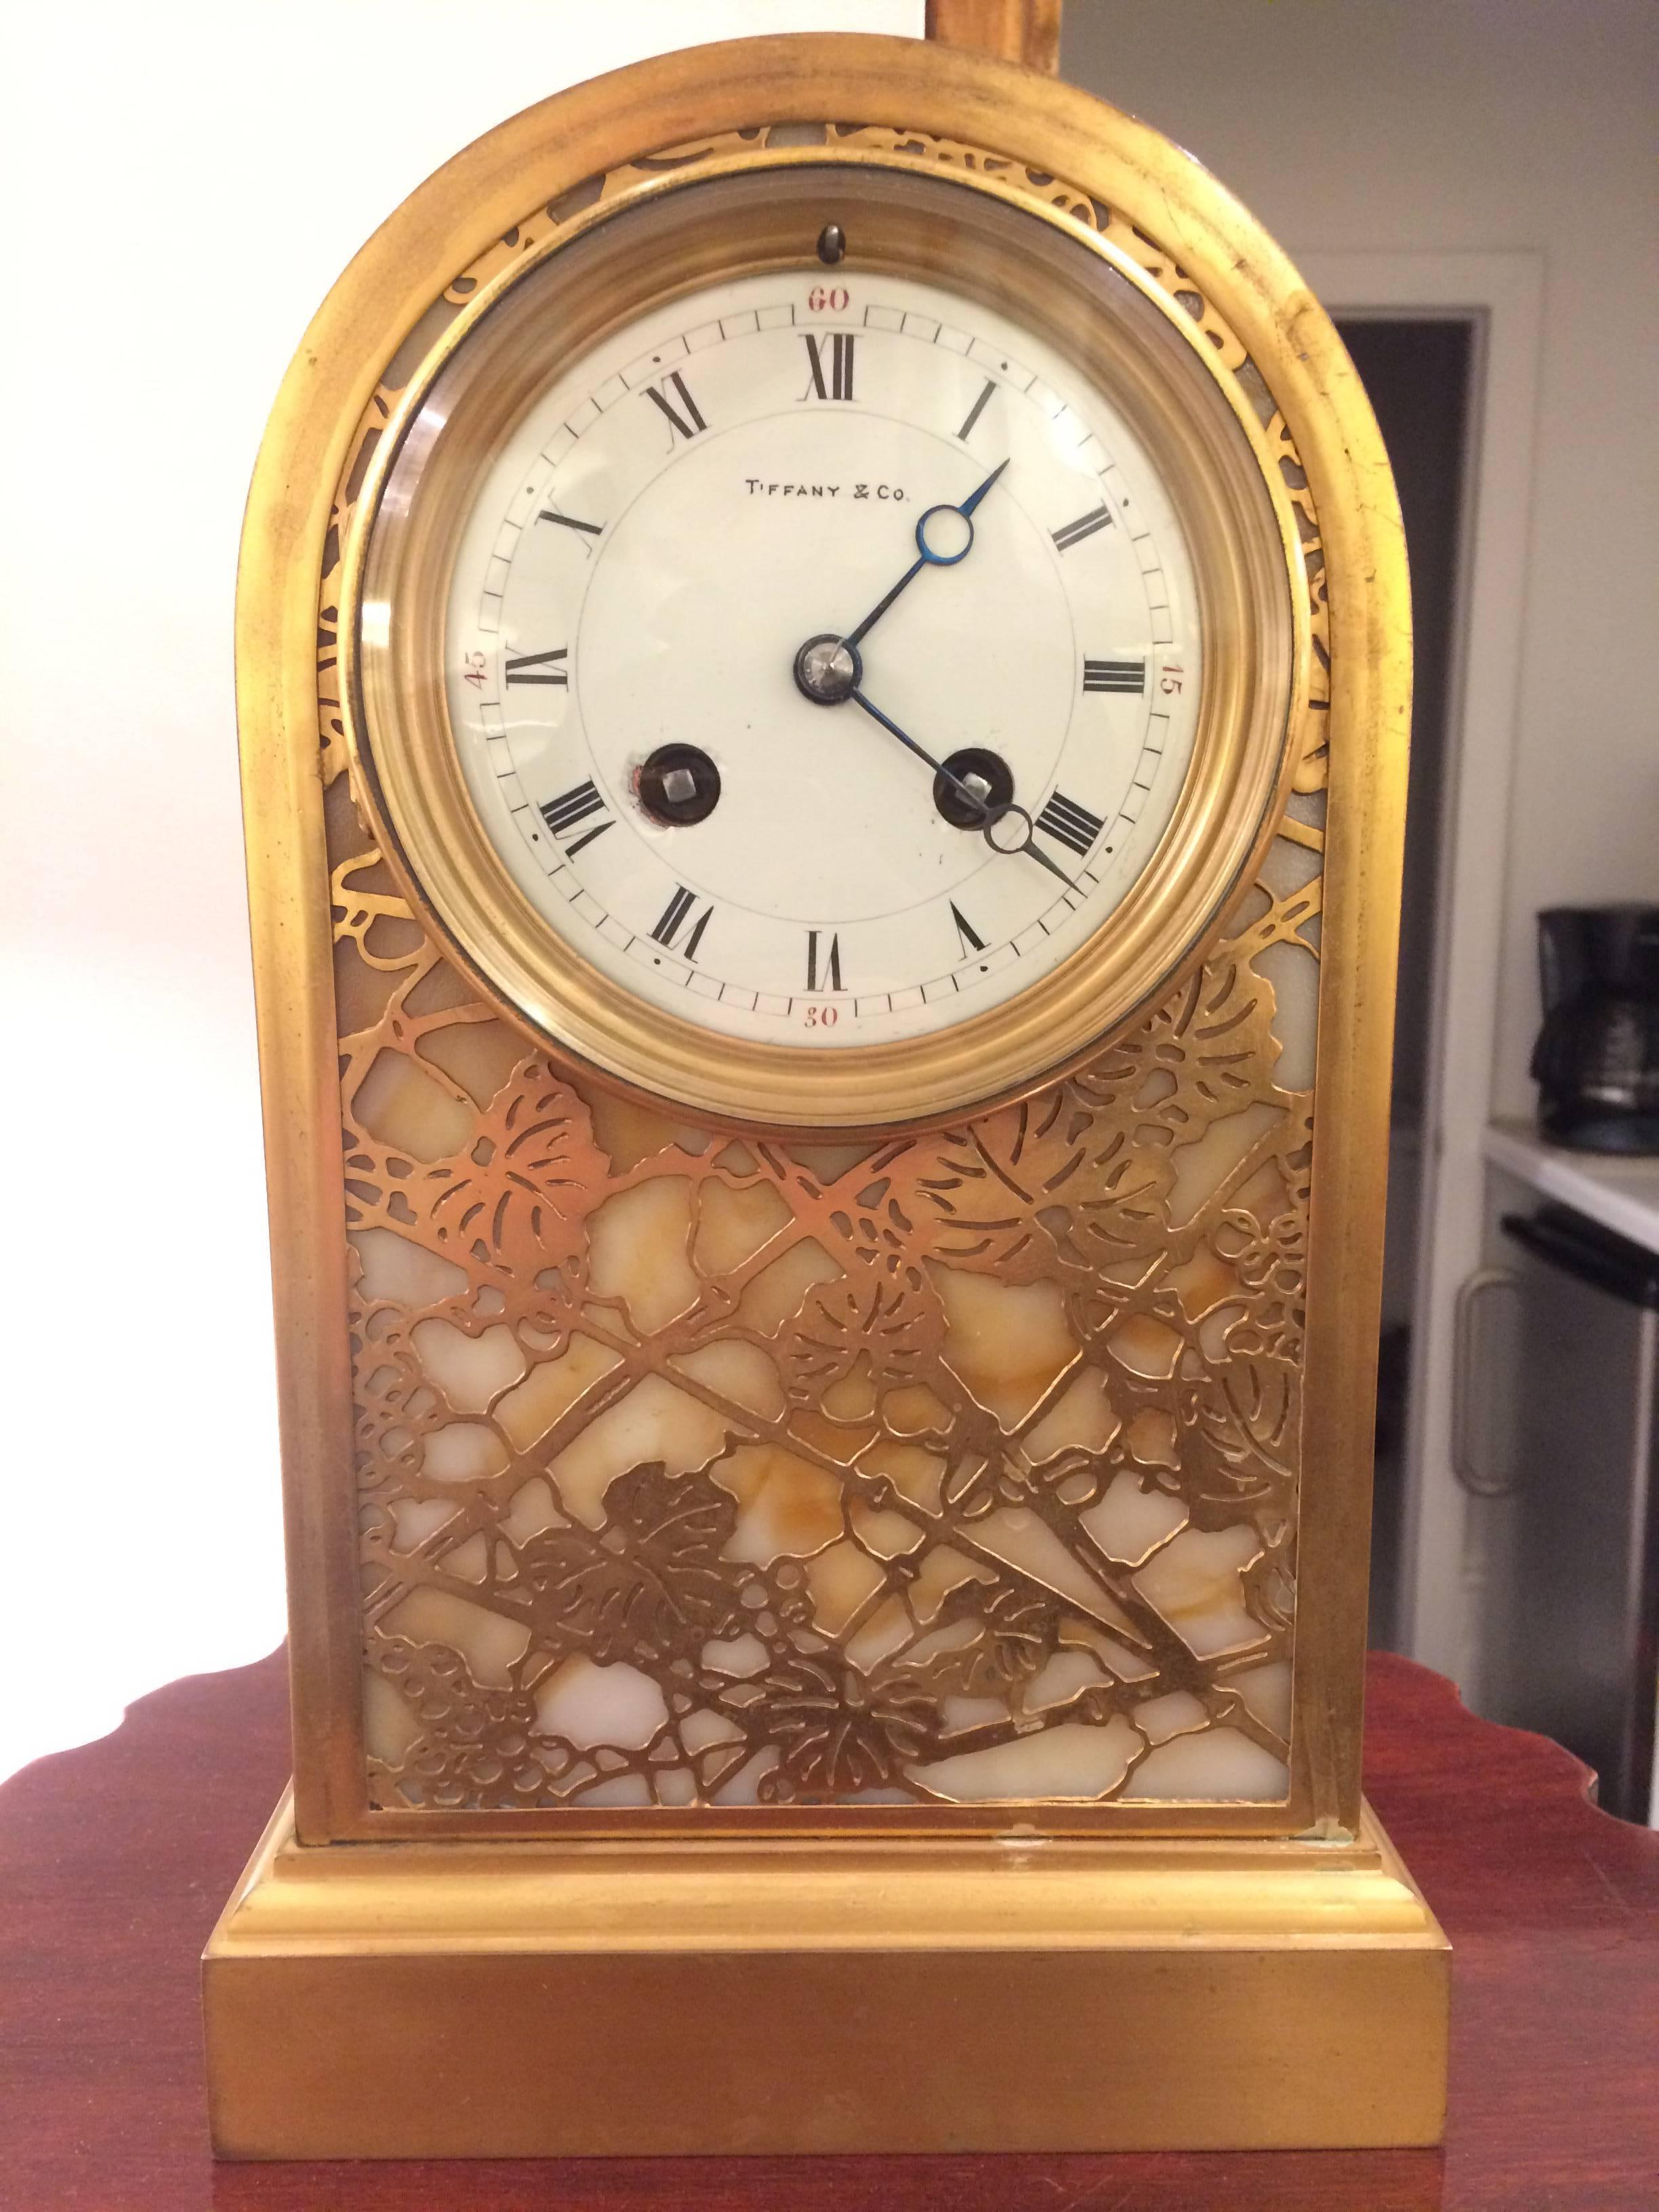 A fine Tiffany Studios Art Nouveau clock.
Grapevine pattern gilt bronze over caramel favrile glass case.
Case marked Tiffany Studios, New York, 879. Porcelain dial marked Tiffany & Co., Roman numerals with red Arabic numerals at the quarter hour.